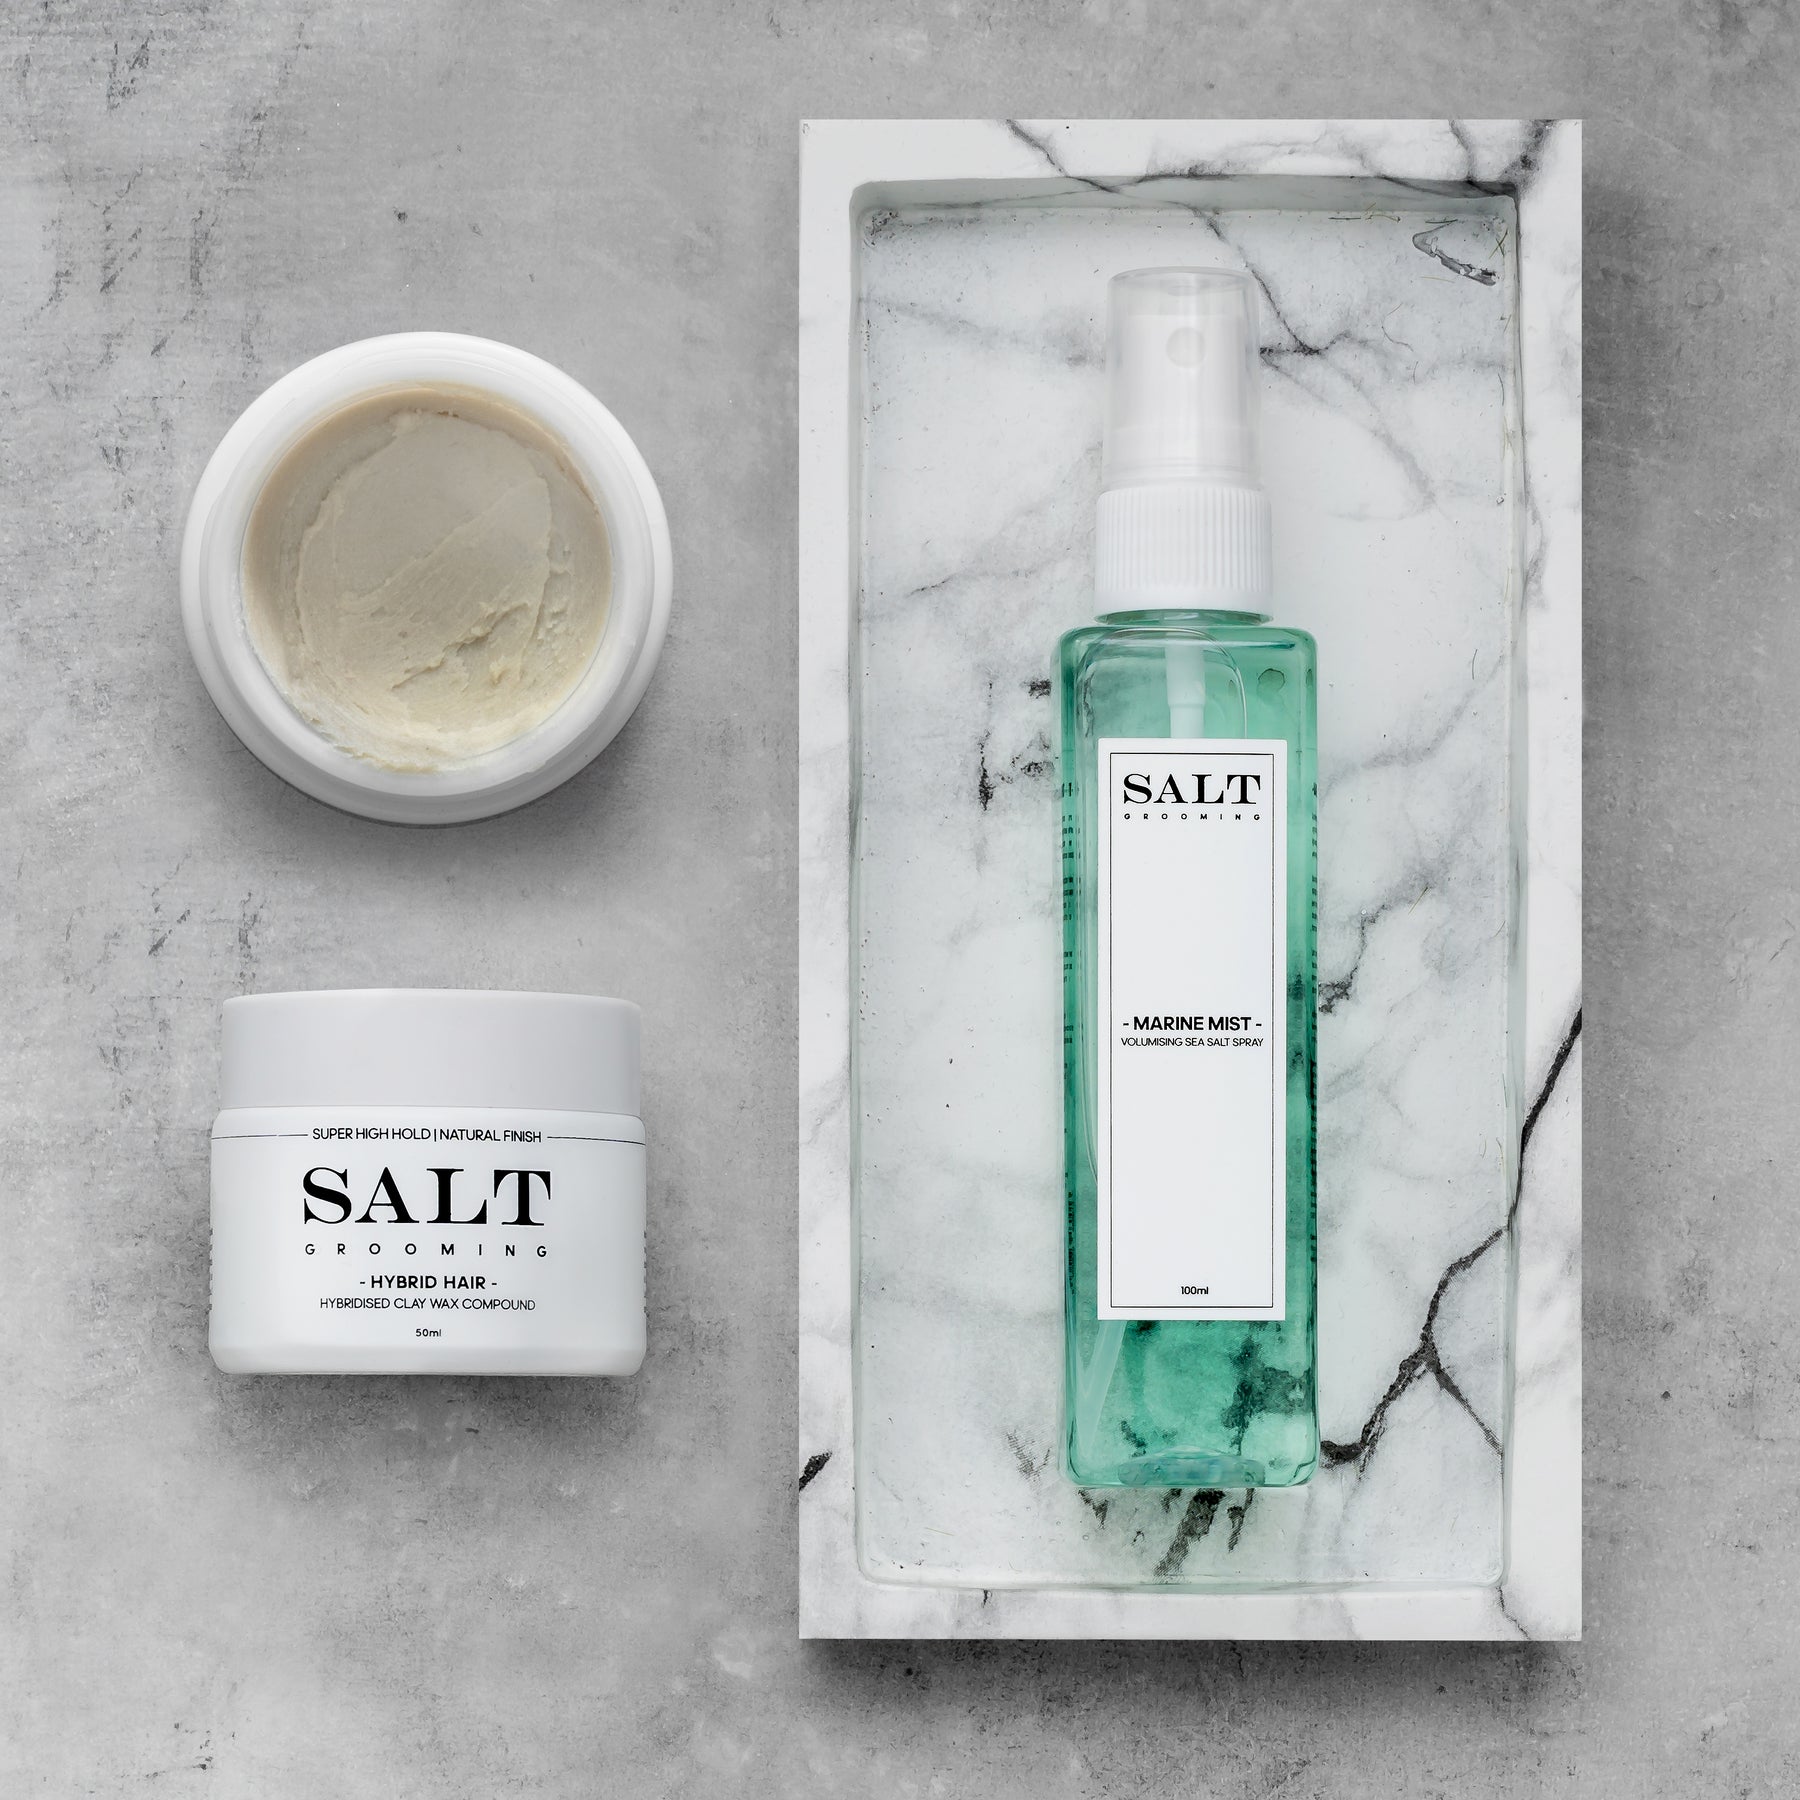 Salt Grooming Hair Style Products